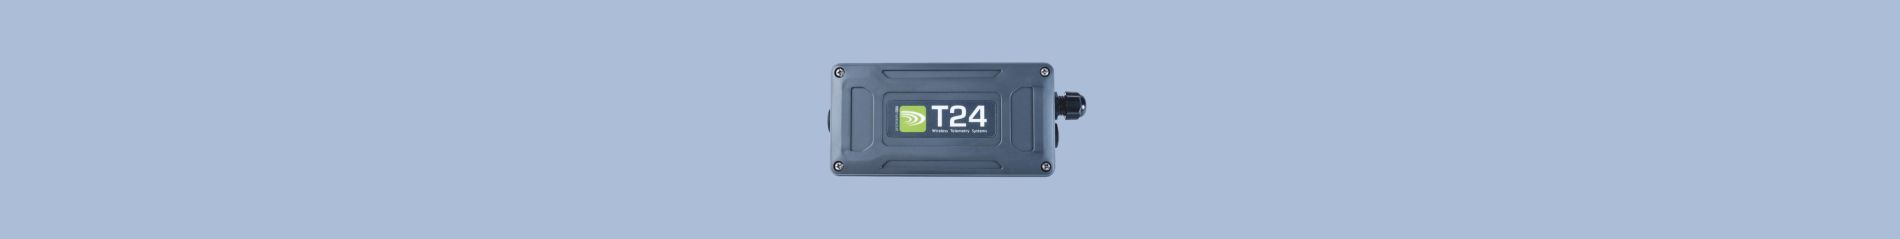 T24-AR Wireless Active Repeater Module